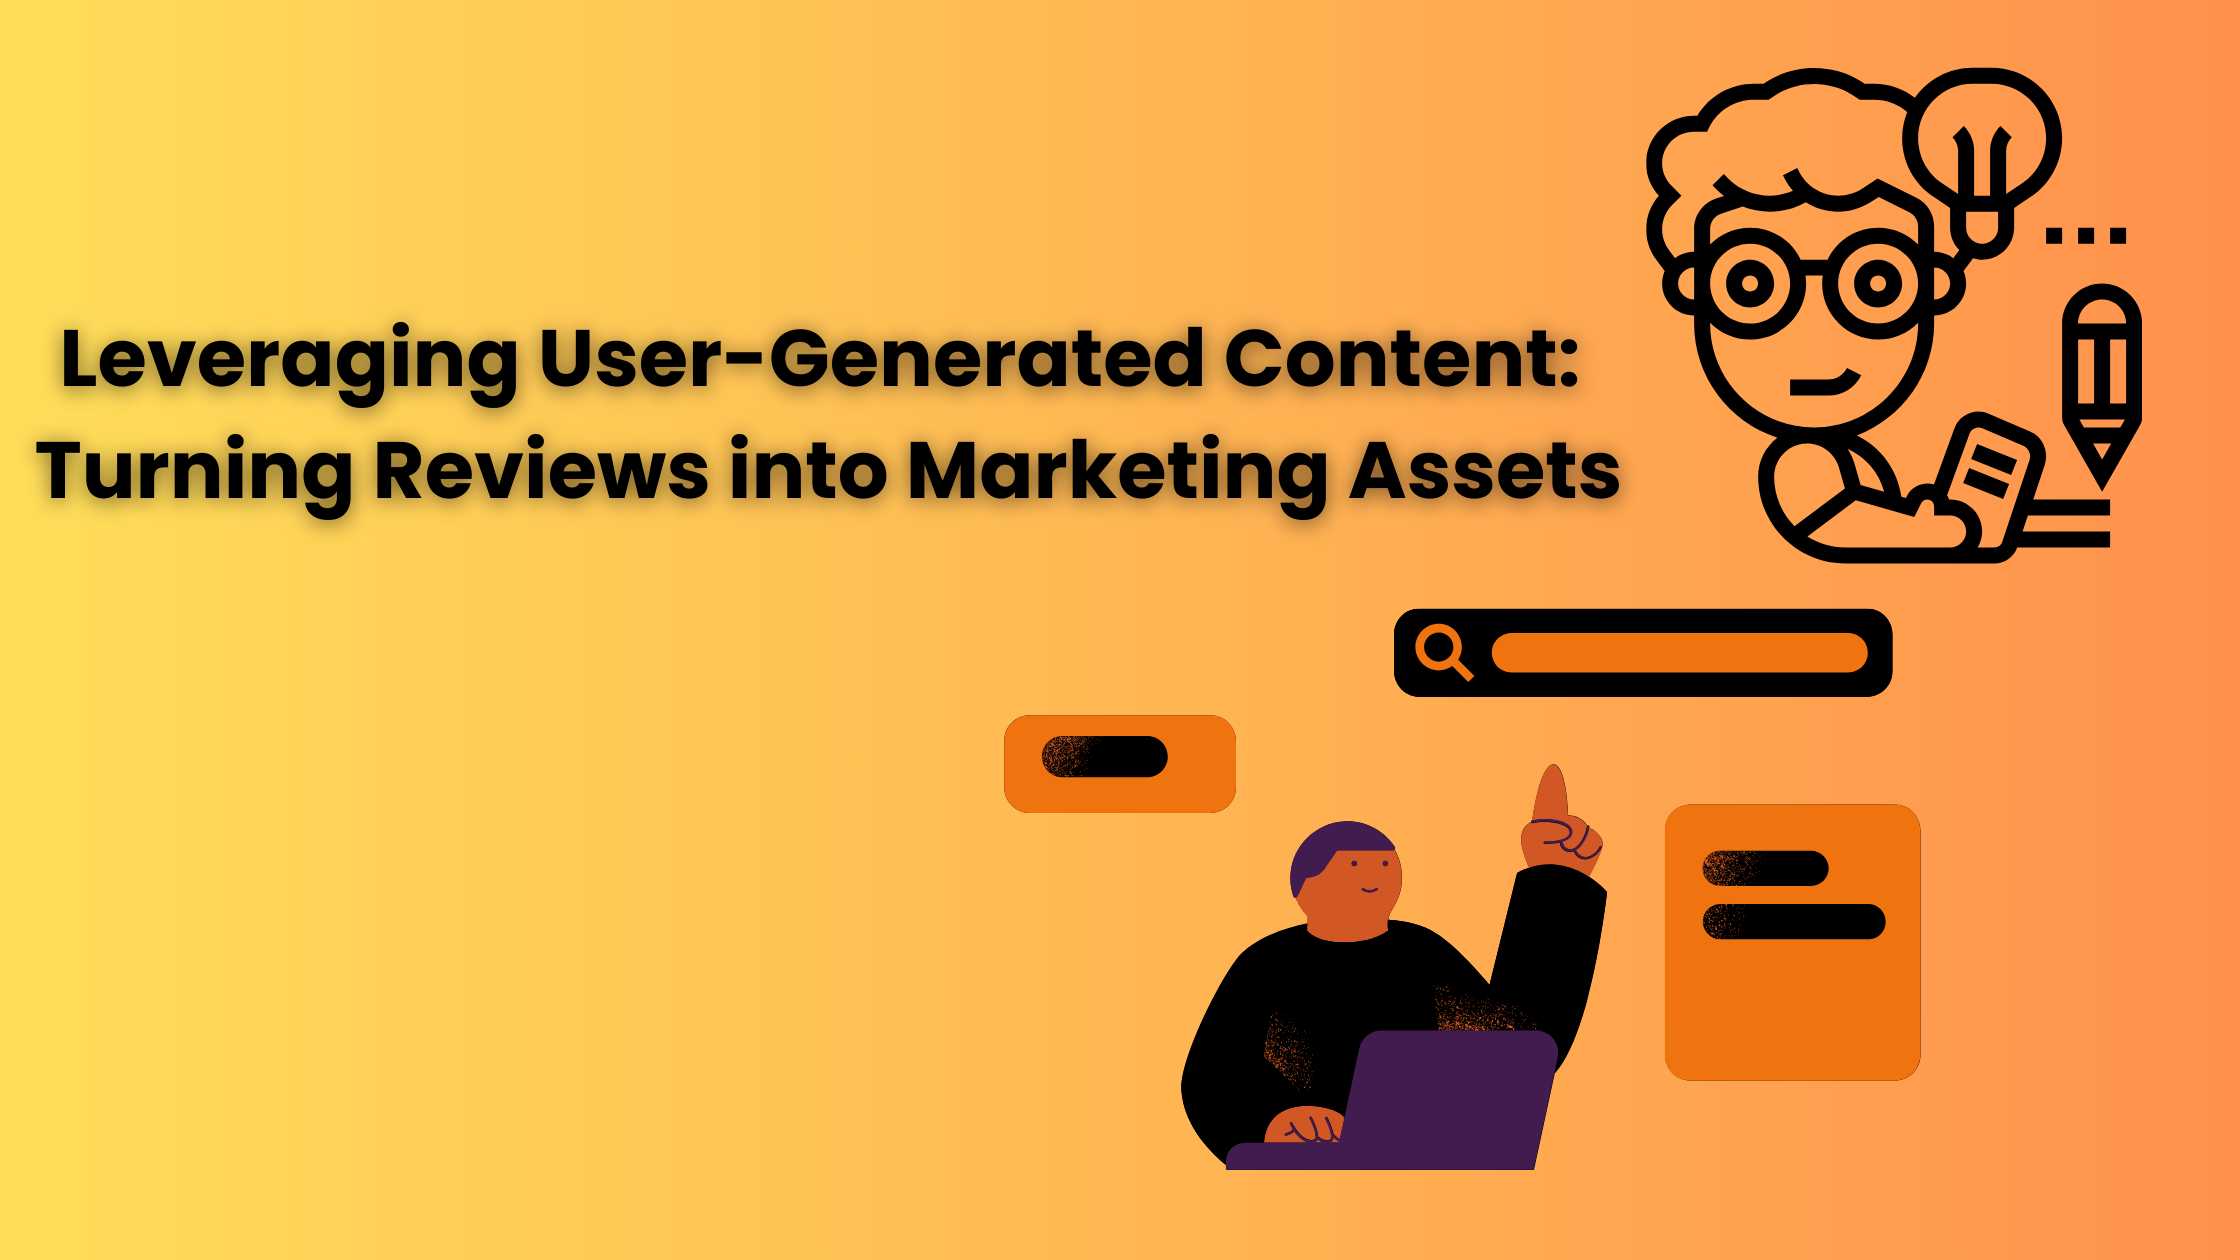 Leveraging User-Generated Content: Turning Reviews into Marketing Assets